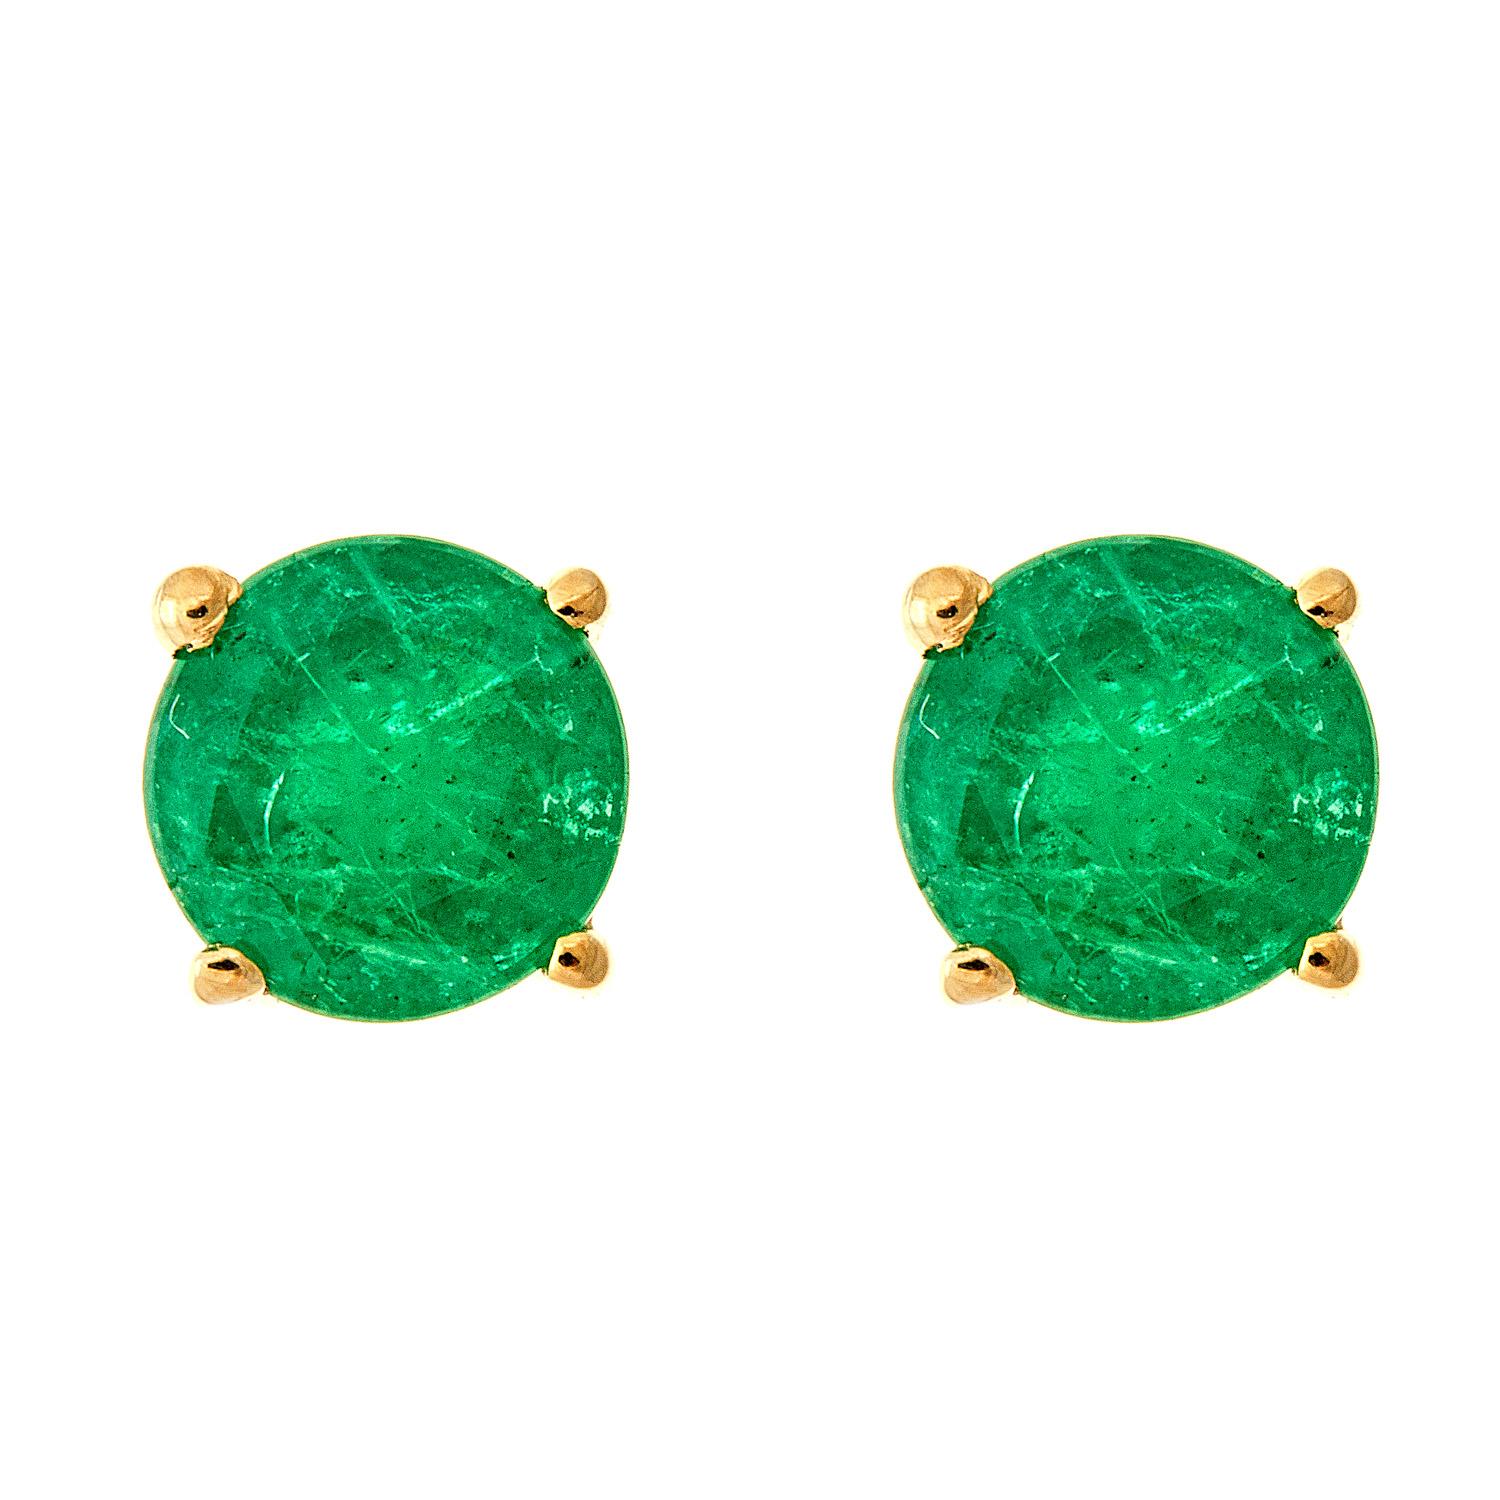 Round Cut 1.01 Carat Round-Cut Emerald 10K Yellow Gold Stud Earrings For Sale